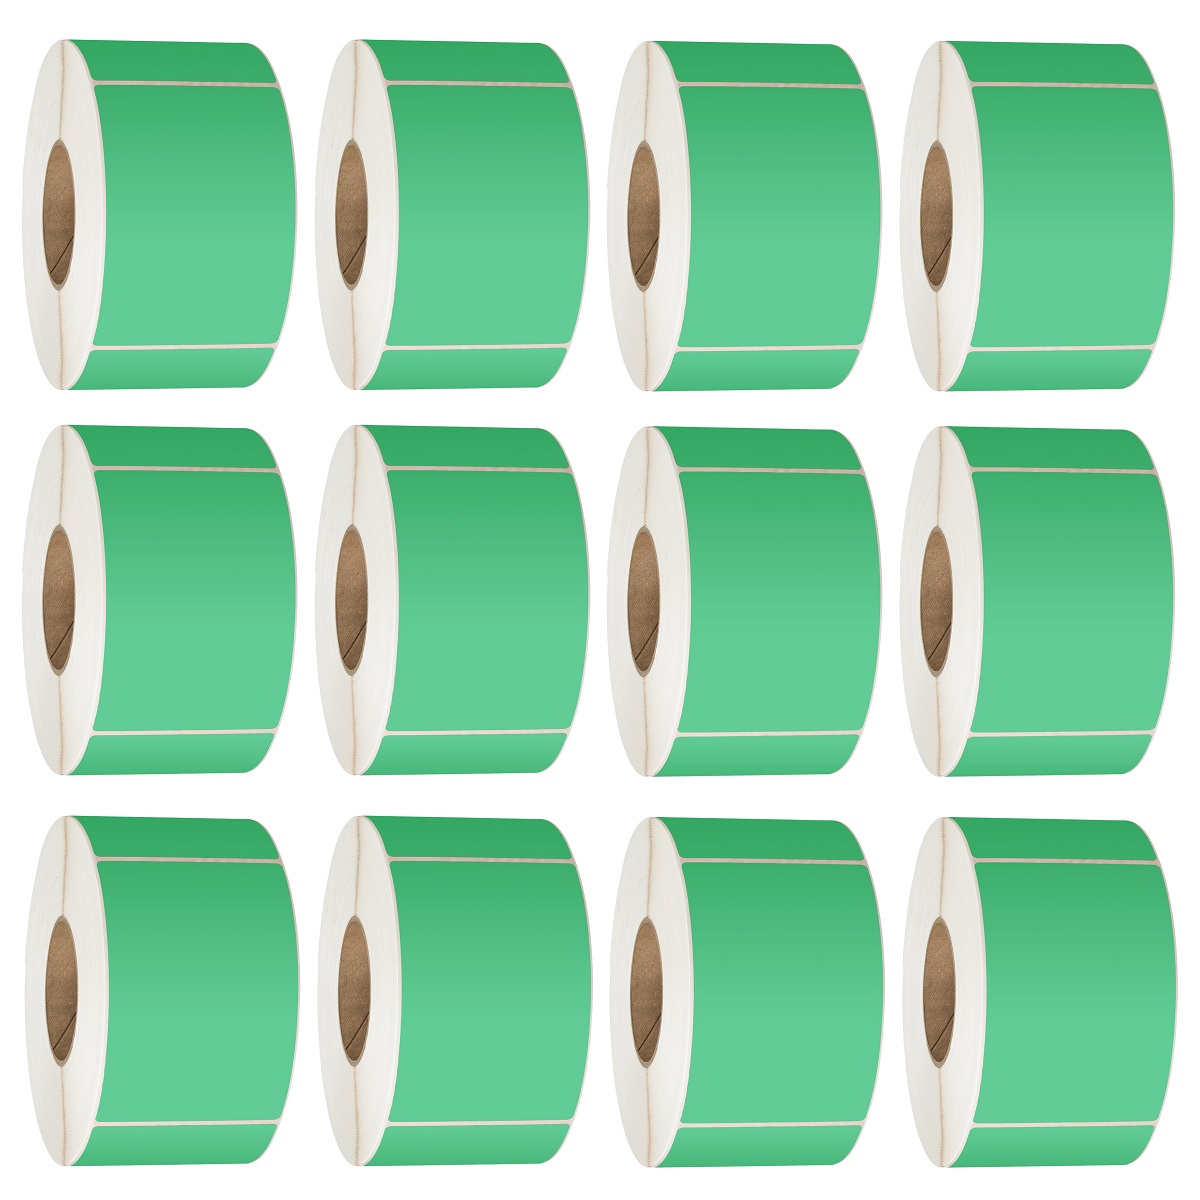 View 76X48 Thermal Transfer Labels 3000/Roll 76mm Core Green - 12 Rolls